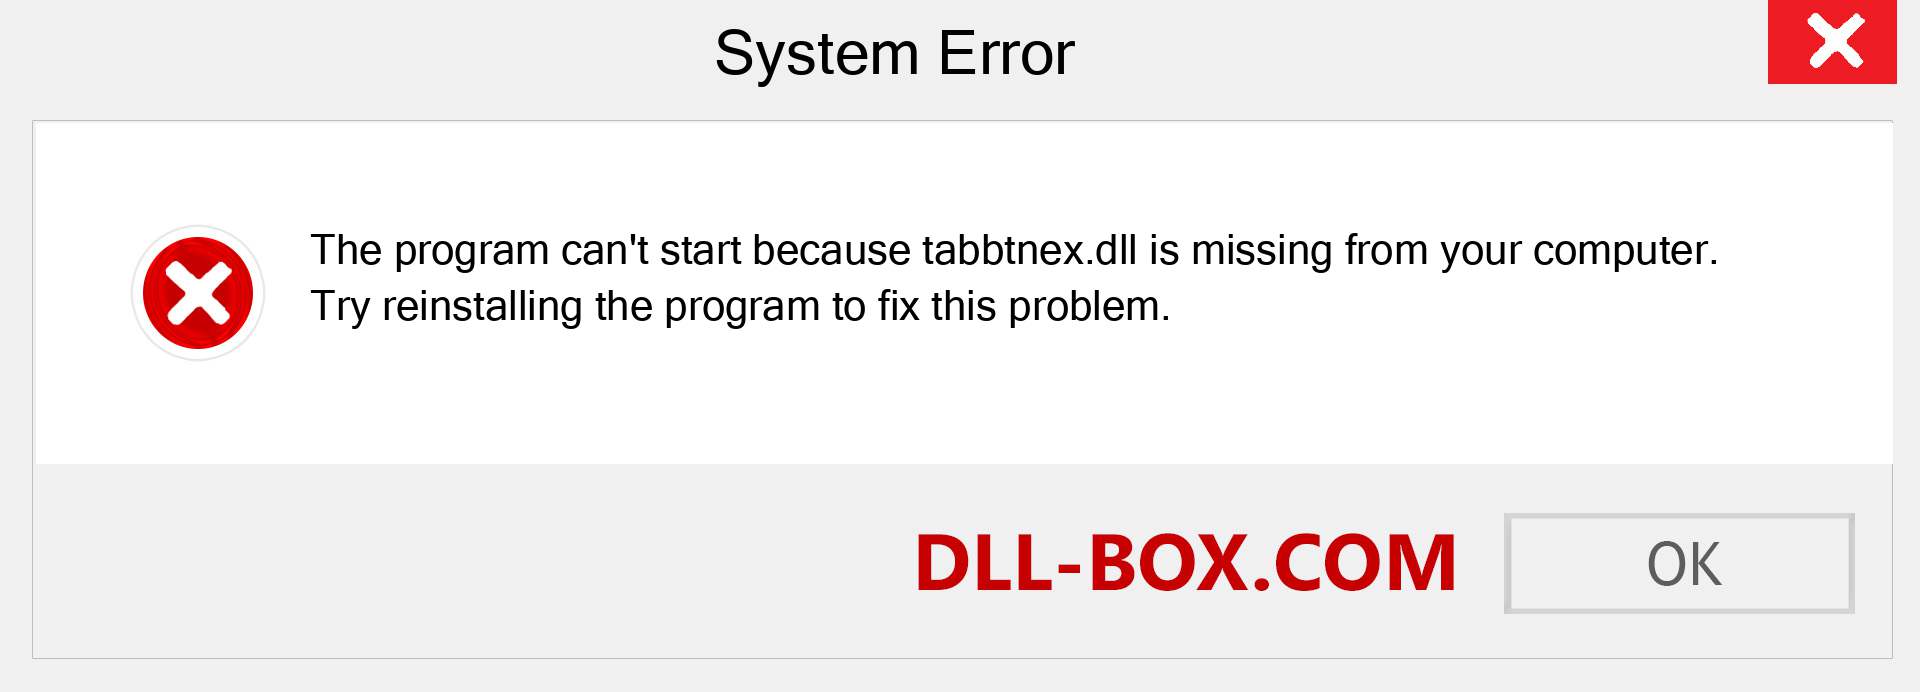  tabbtnex.dll file is missing?. Download for Windows 7, 8, 10 - Fix  tabbtnex dll Missing Error on Windows, photos, images